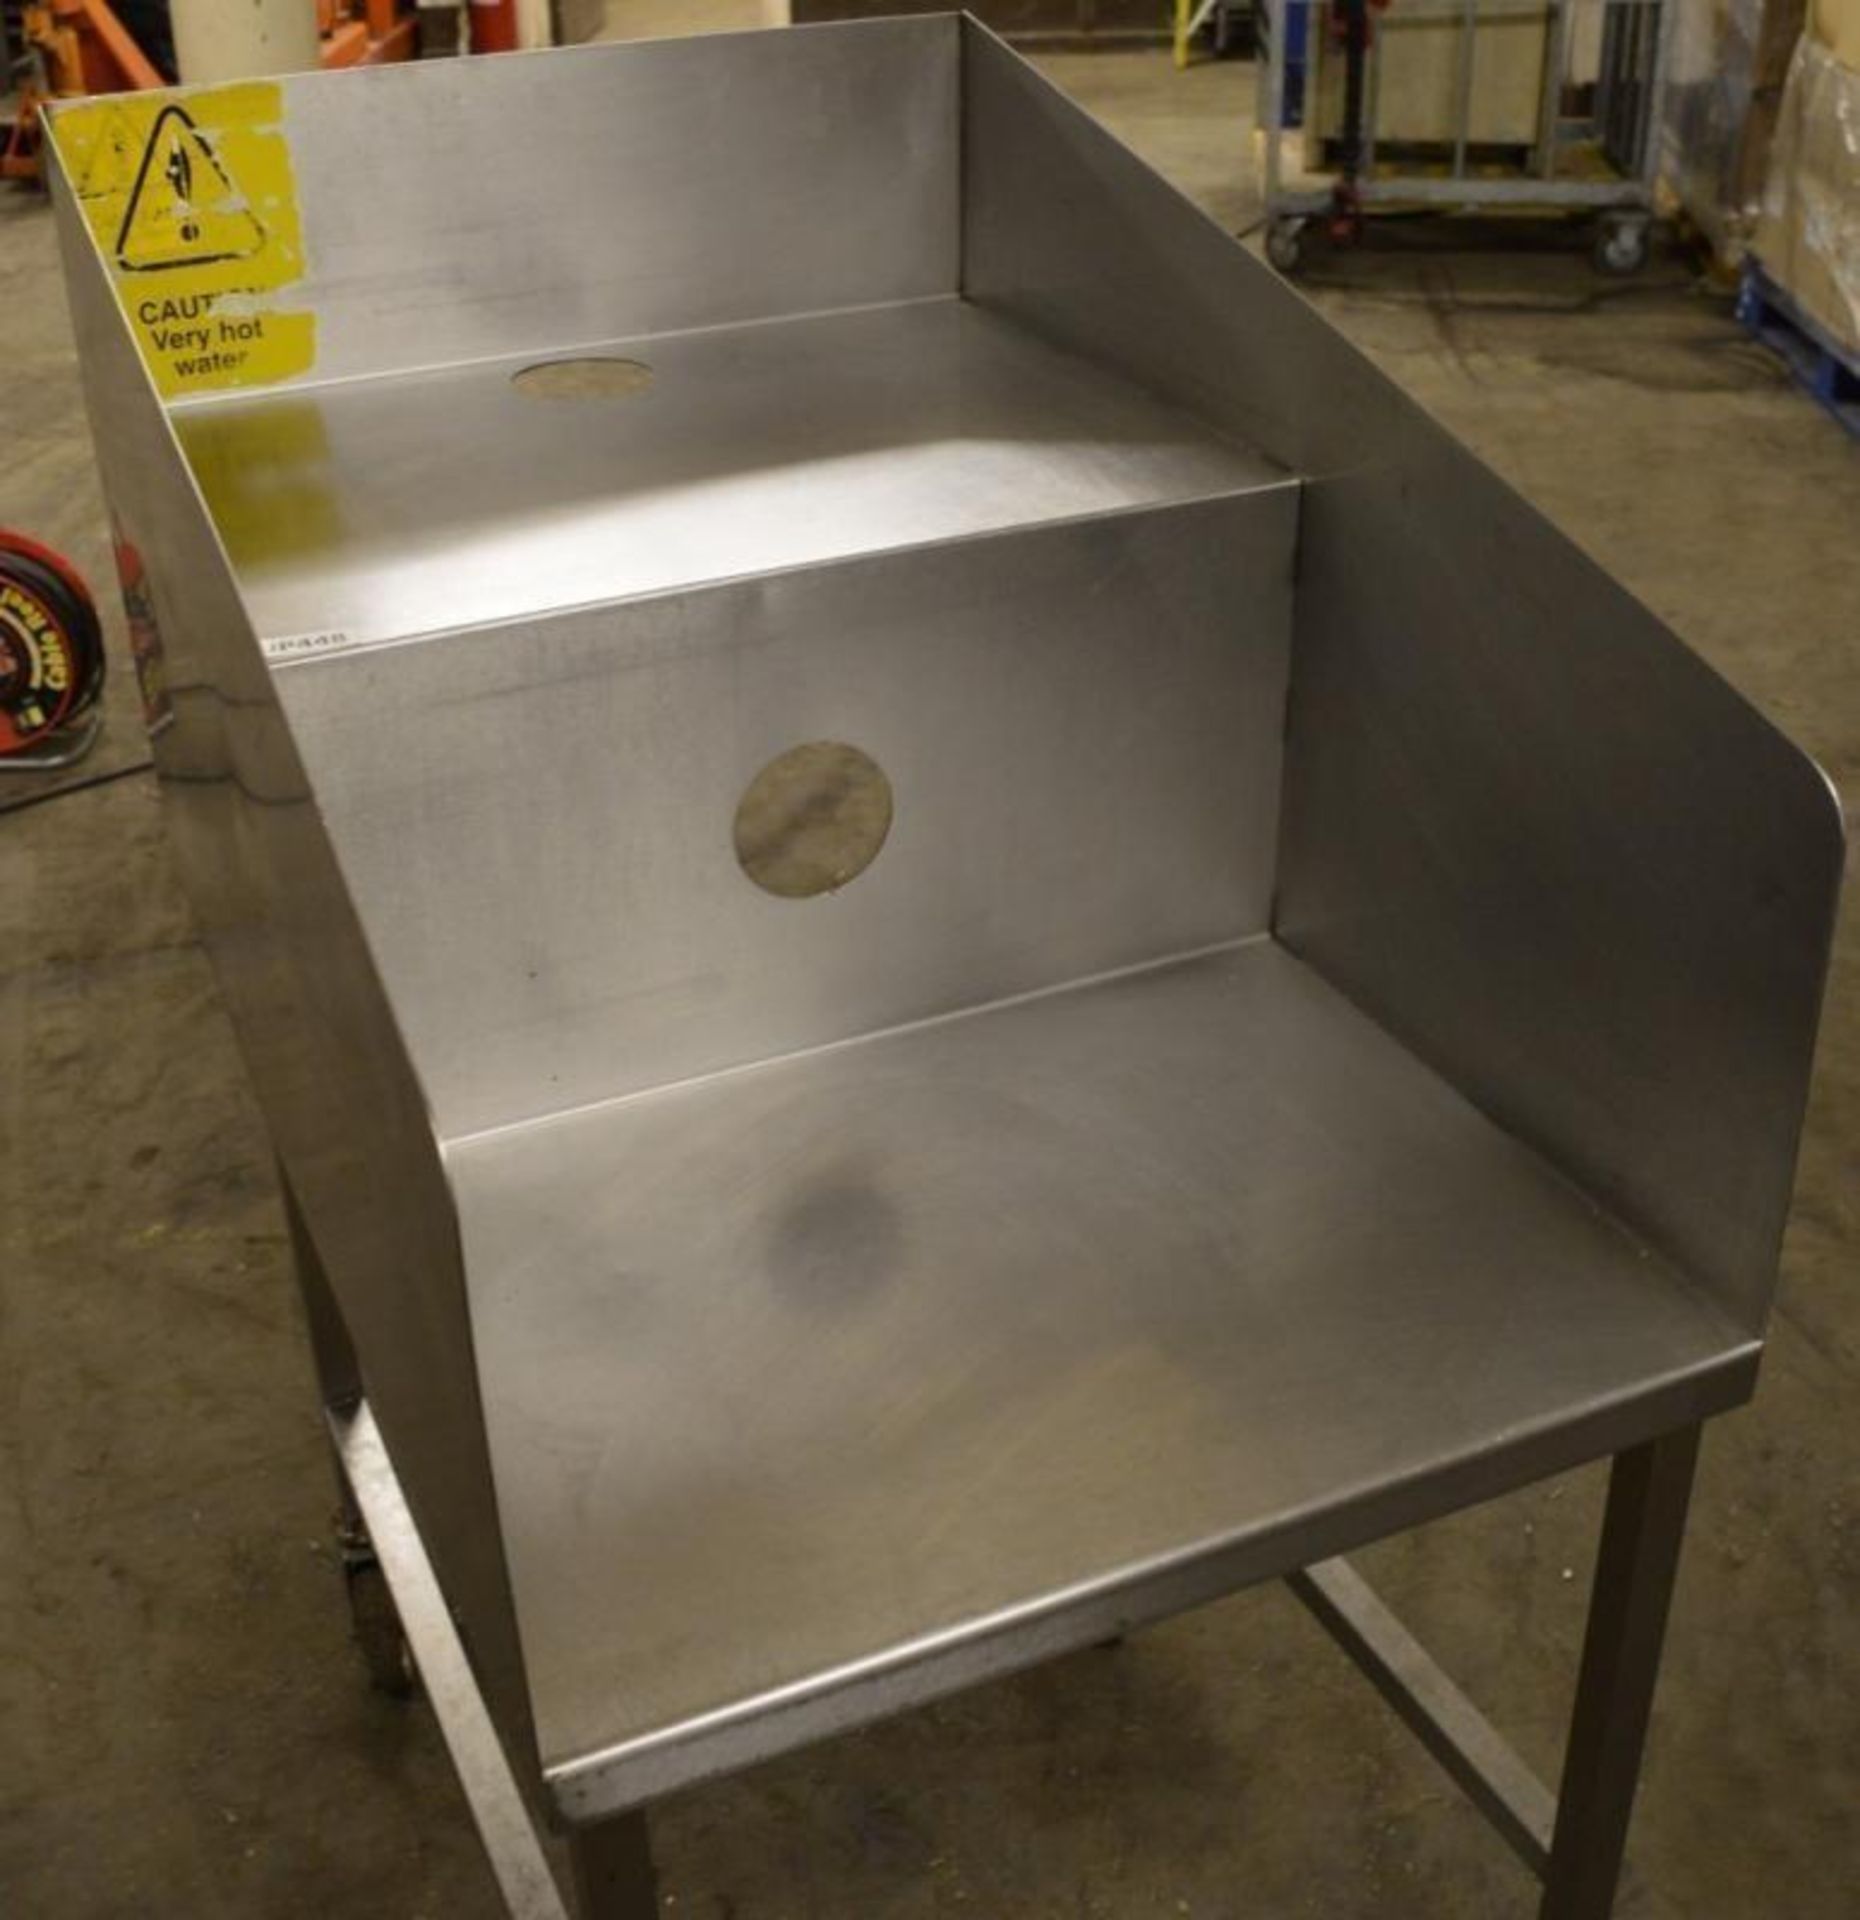 1 x Stainless Steel Commercial Waste Bench - Two Tier Waste Chute on Castors - H114 x W62.5 x D90 cm - Image 4 of 5